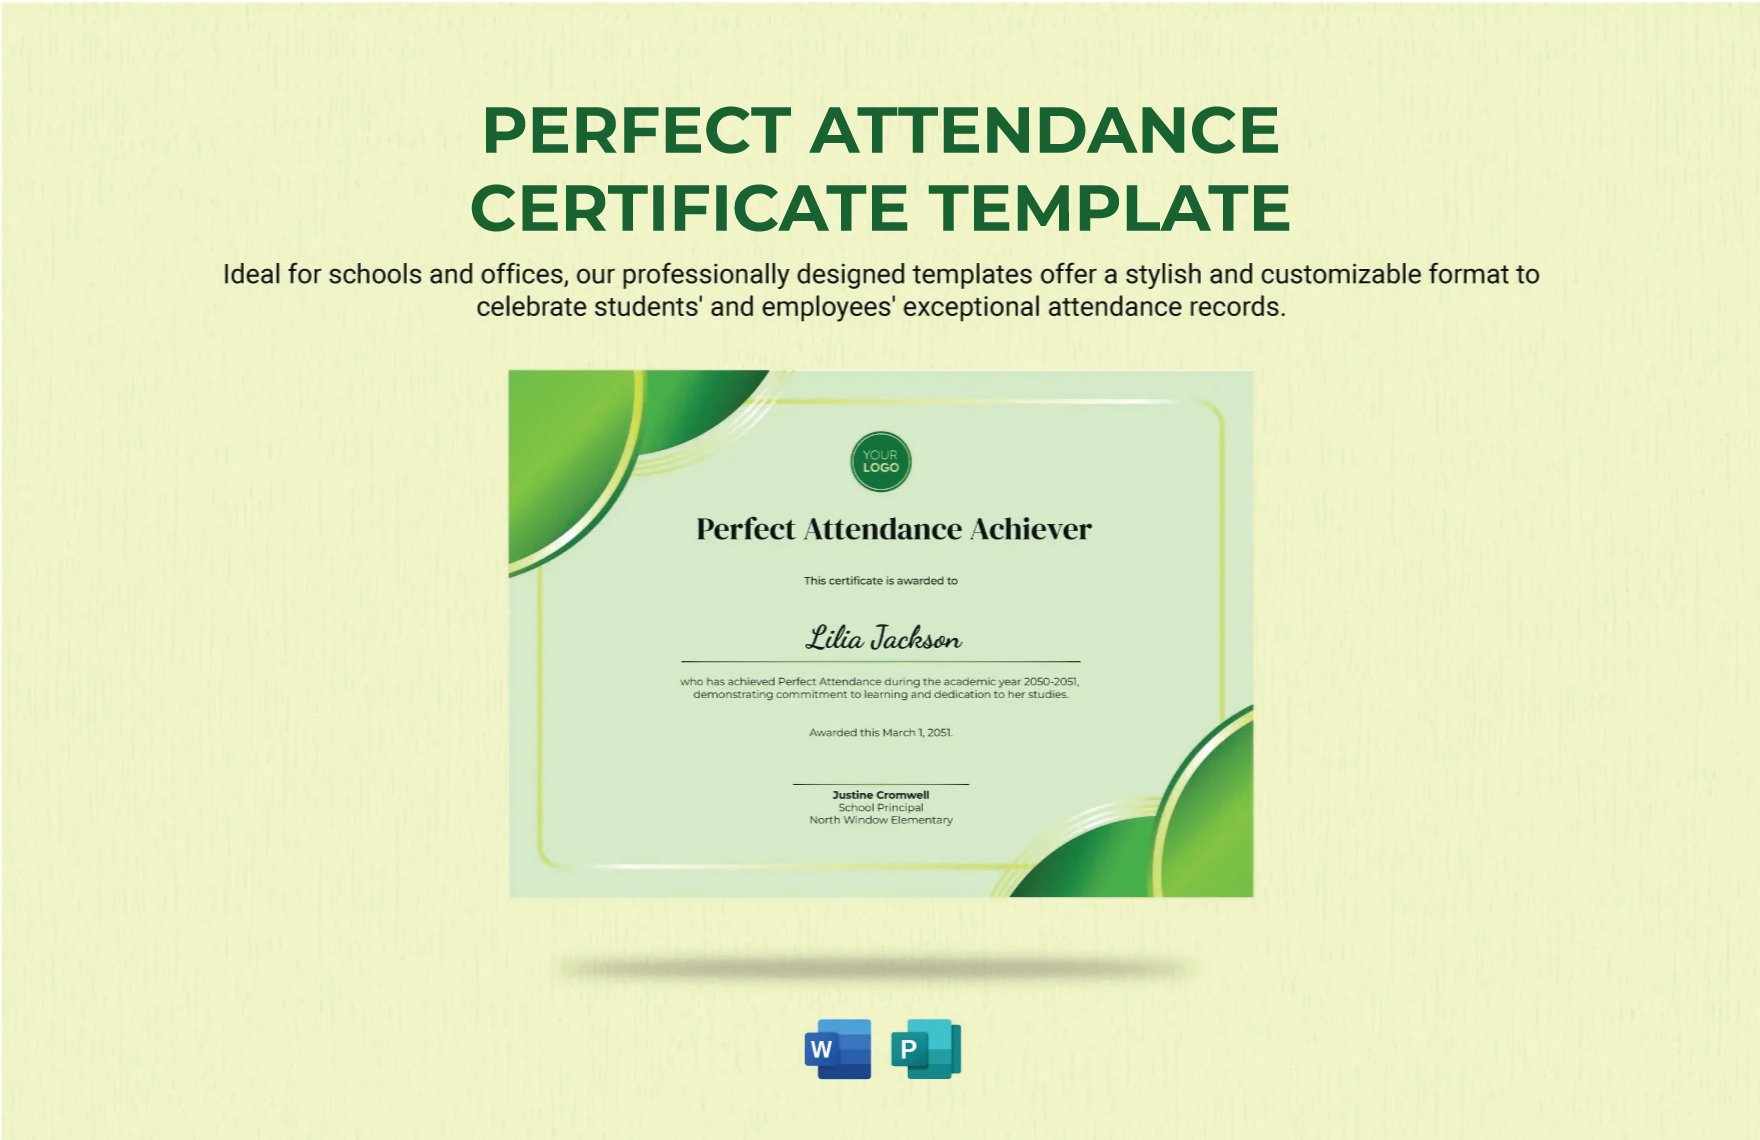 Free Perfect Attendance Certificate Template in Word, Publisher